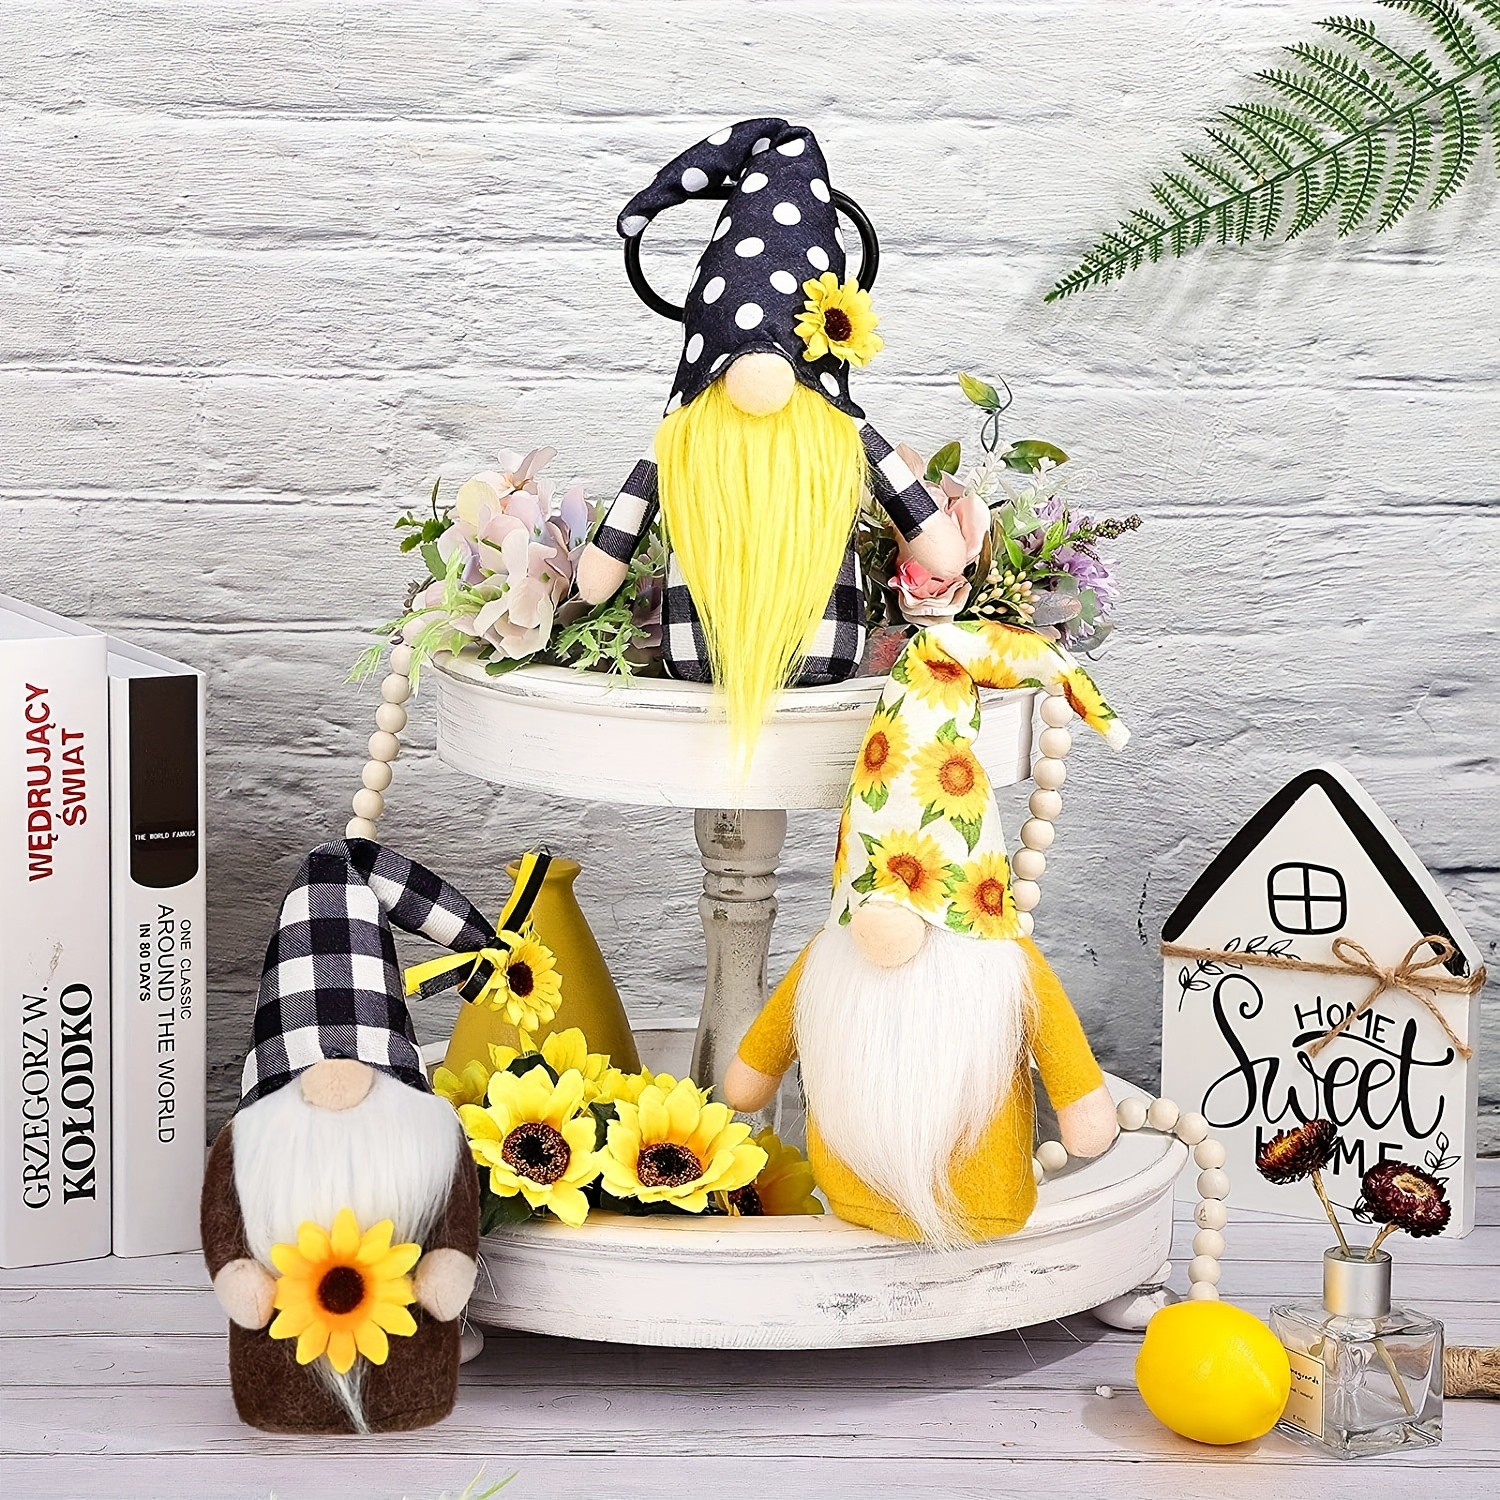  Bumble Bee Gnome Plush,Spring Gnome Decor, World Bee Day Honey  bee Gnomes Decorations for Home Farmhouse Tier Tray Decor, Summer Gnomes  Decor, Gnome Gifts for Woman : Home & Kitchen